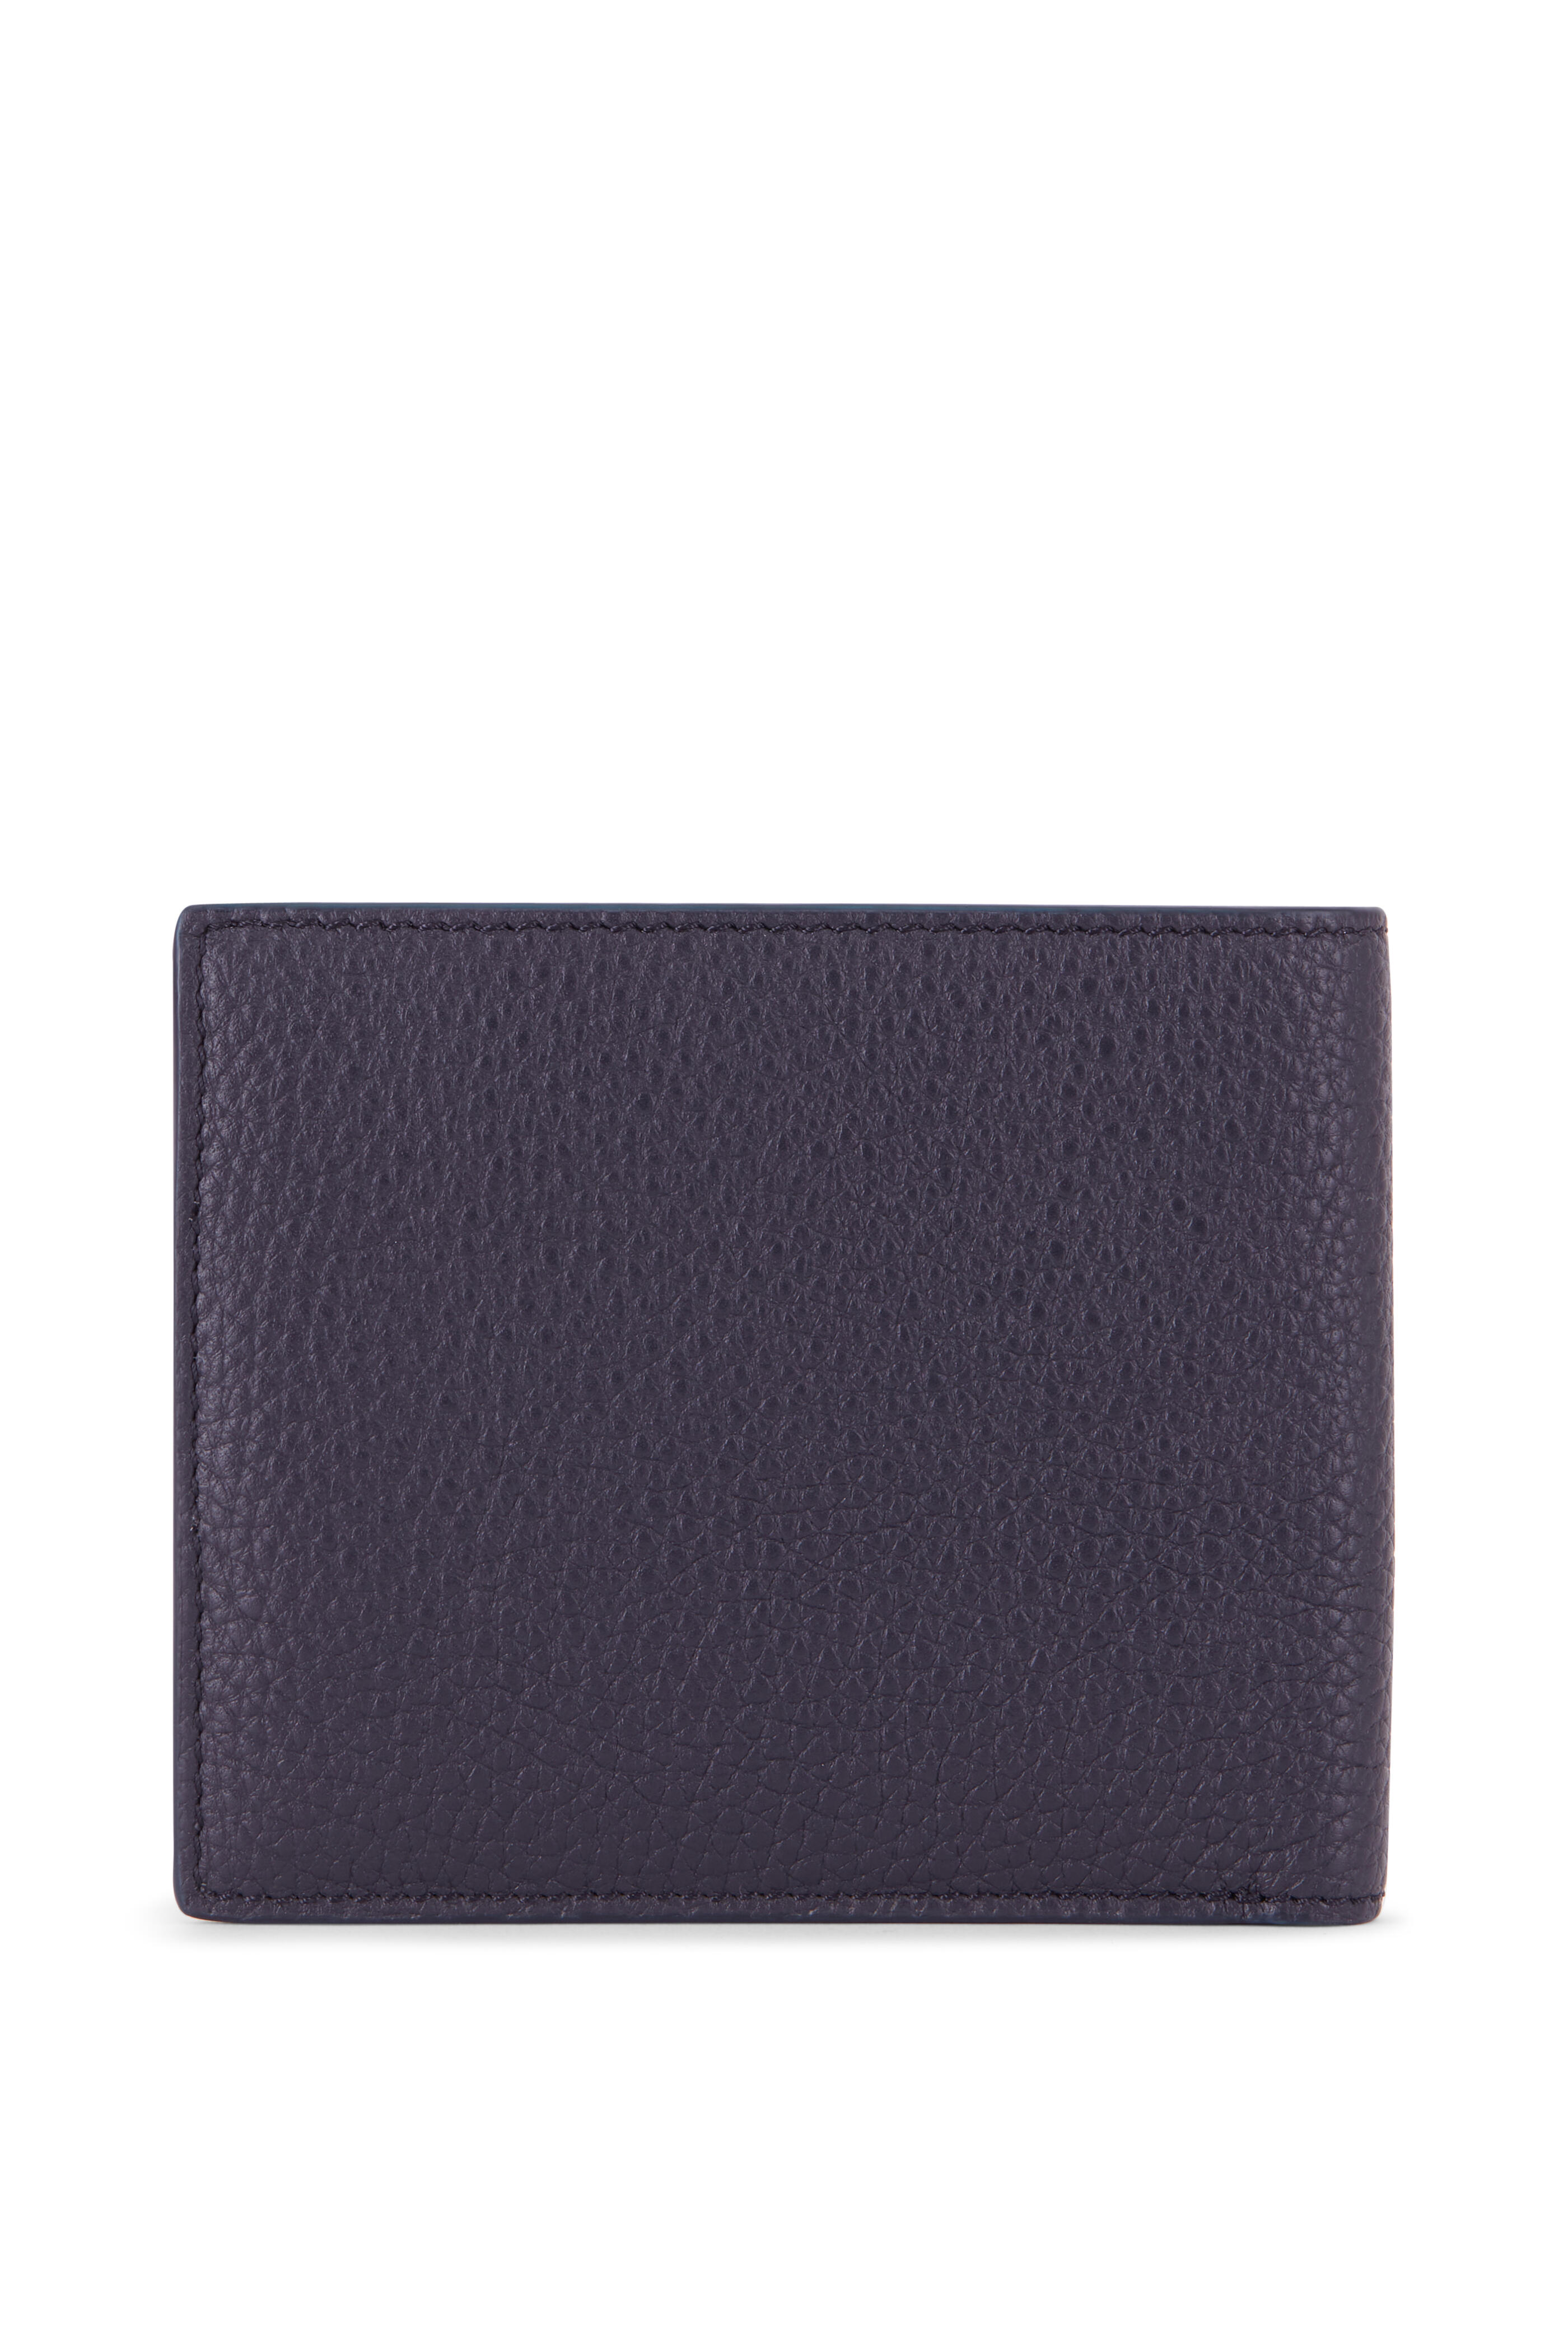 Tom Ford - Navy Grained Leather Bi-Fold Wallet | Mitchell Stores